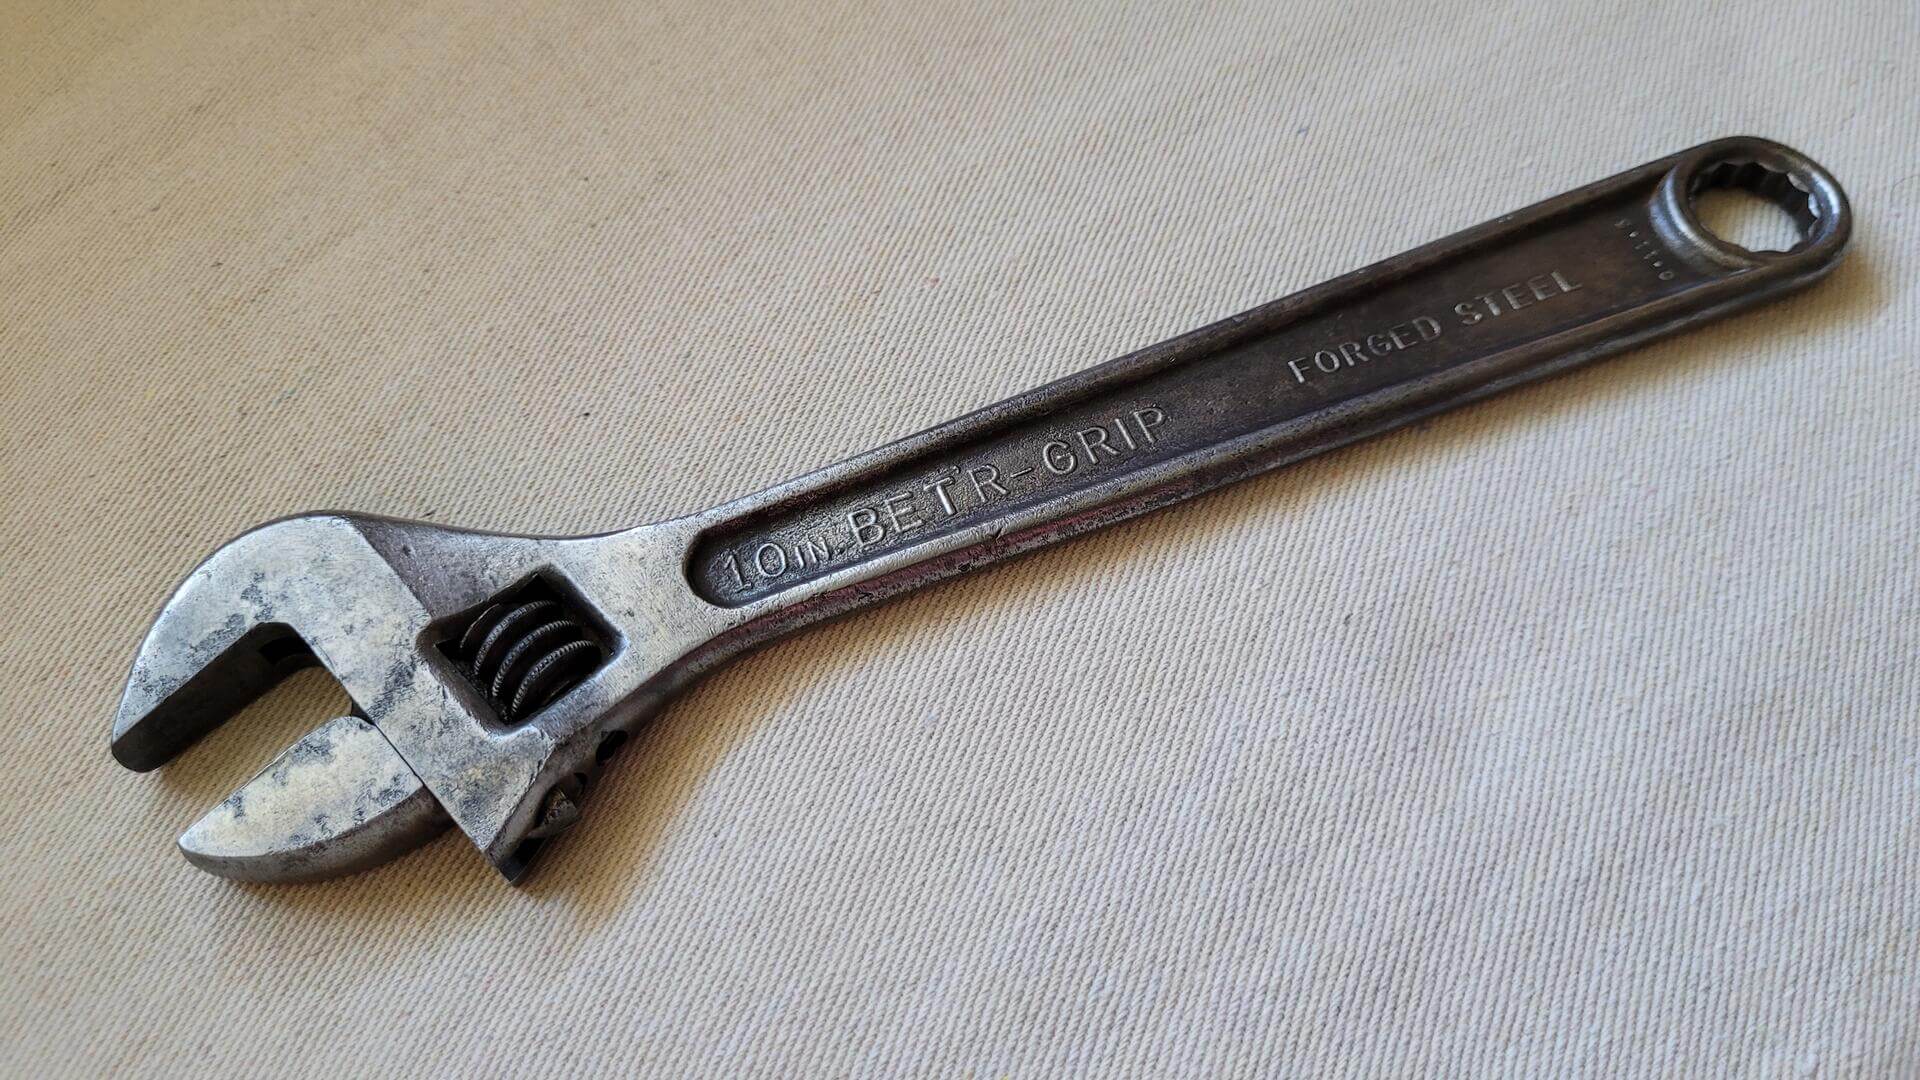 Vintage J.P. Danielson & Company 10 inch Betr-Grip forged steel adjustable wrench - Antique Jamestown NY made in USA collectible hand tools